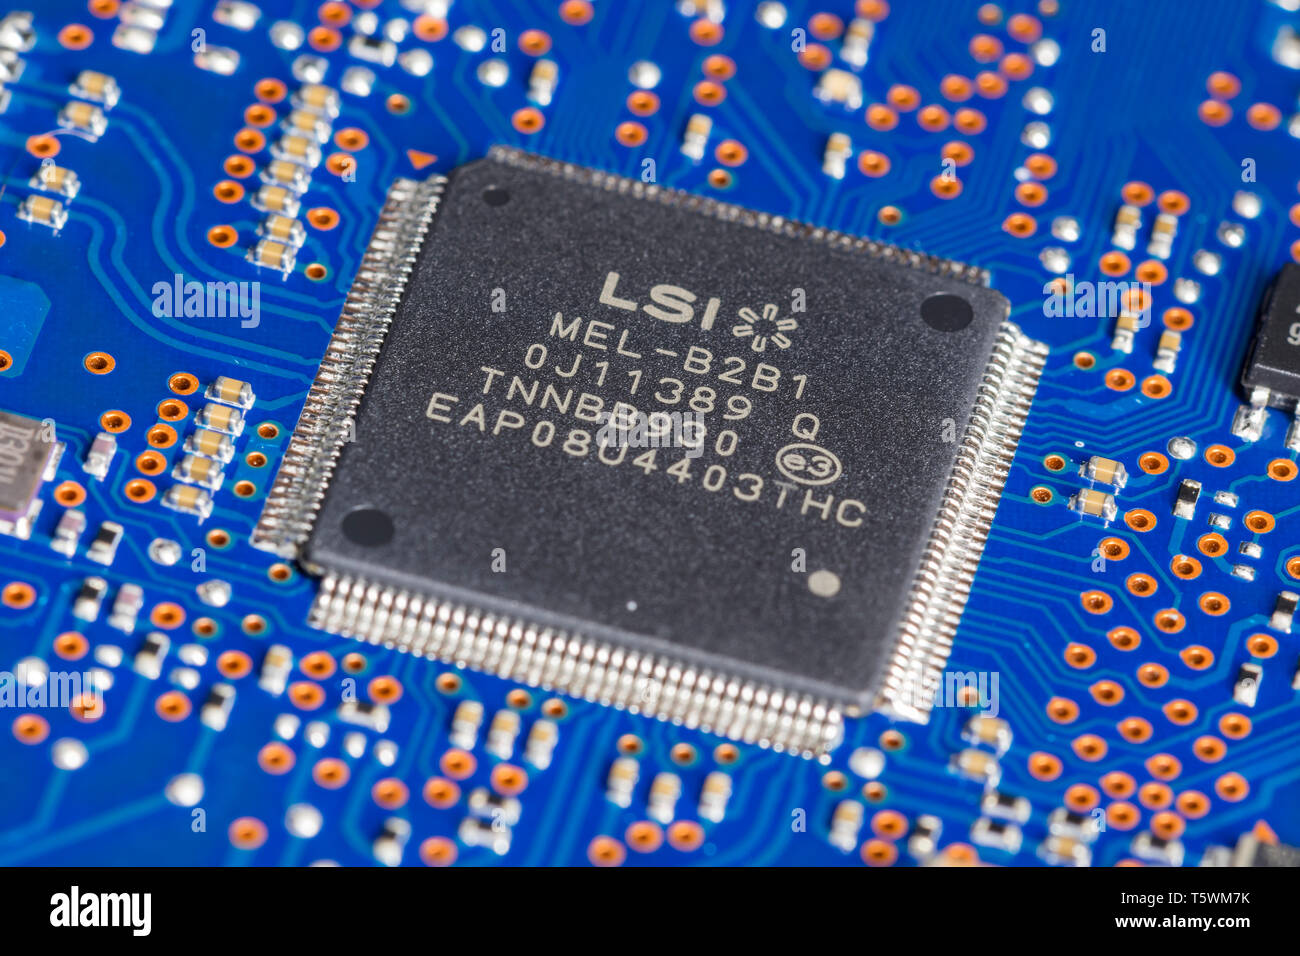 LSI Quad Flat Pack package type of surface mount technology (SMT) chip mounted on a PCB. Stock Photo